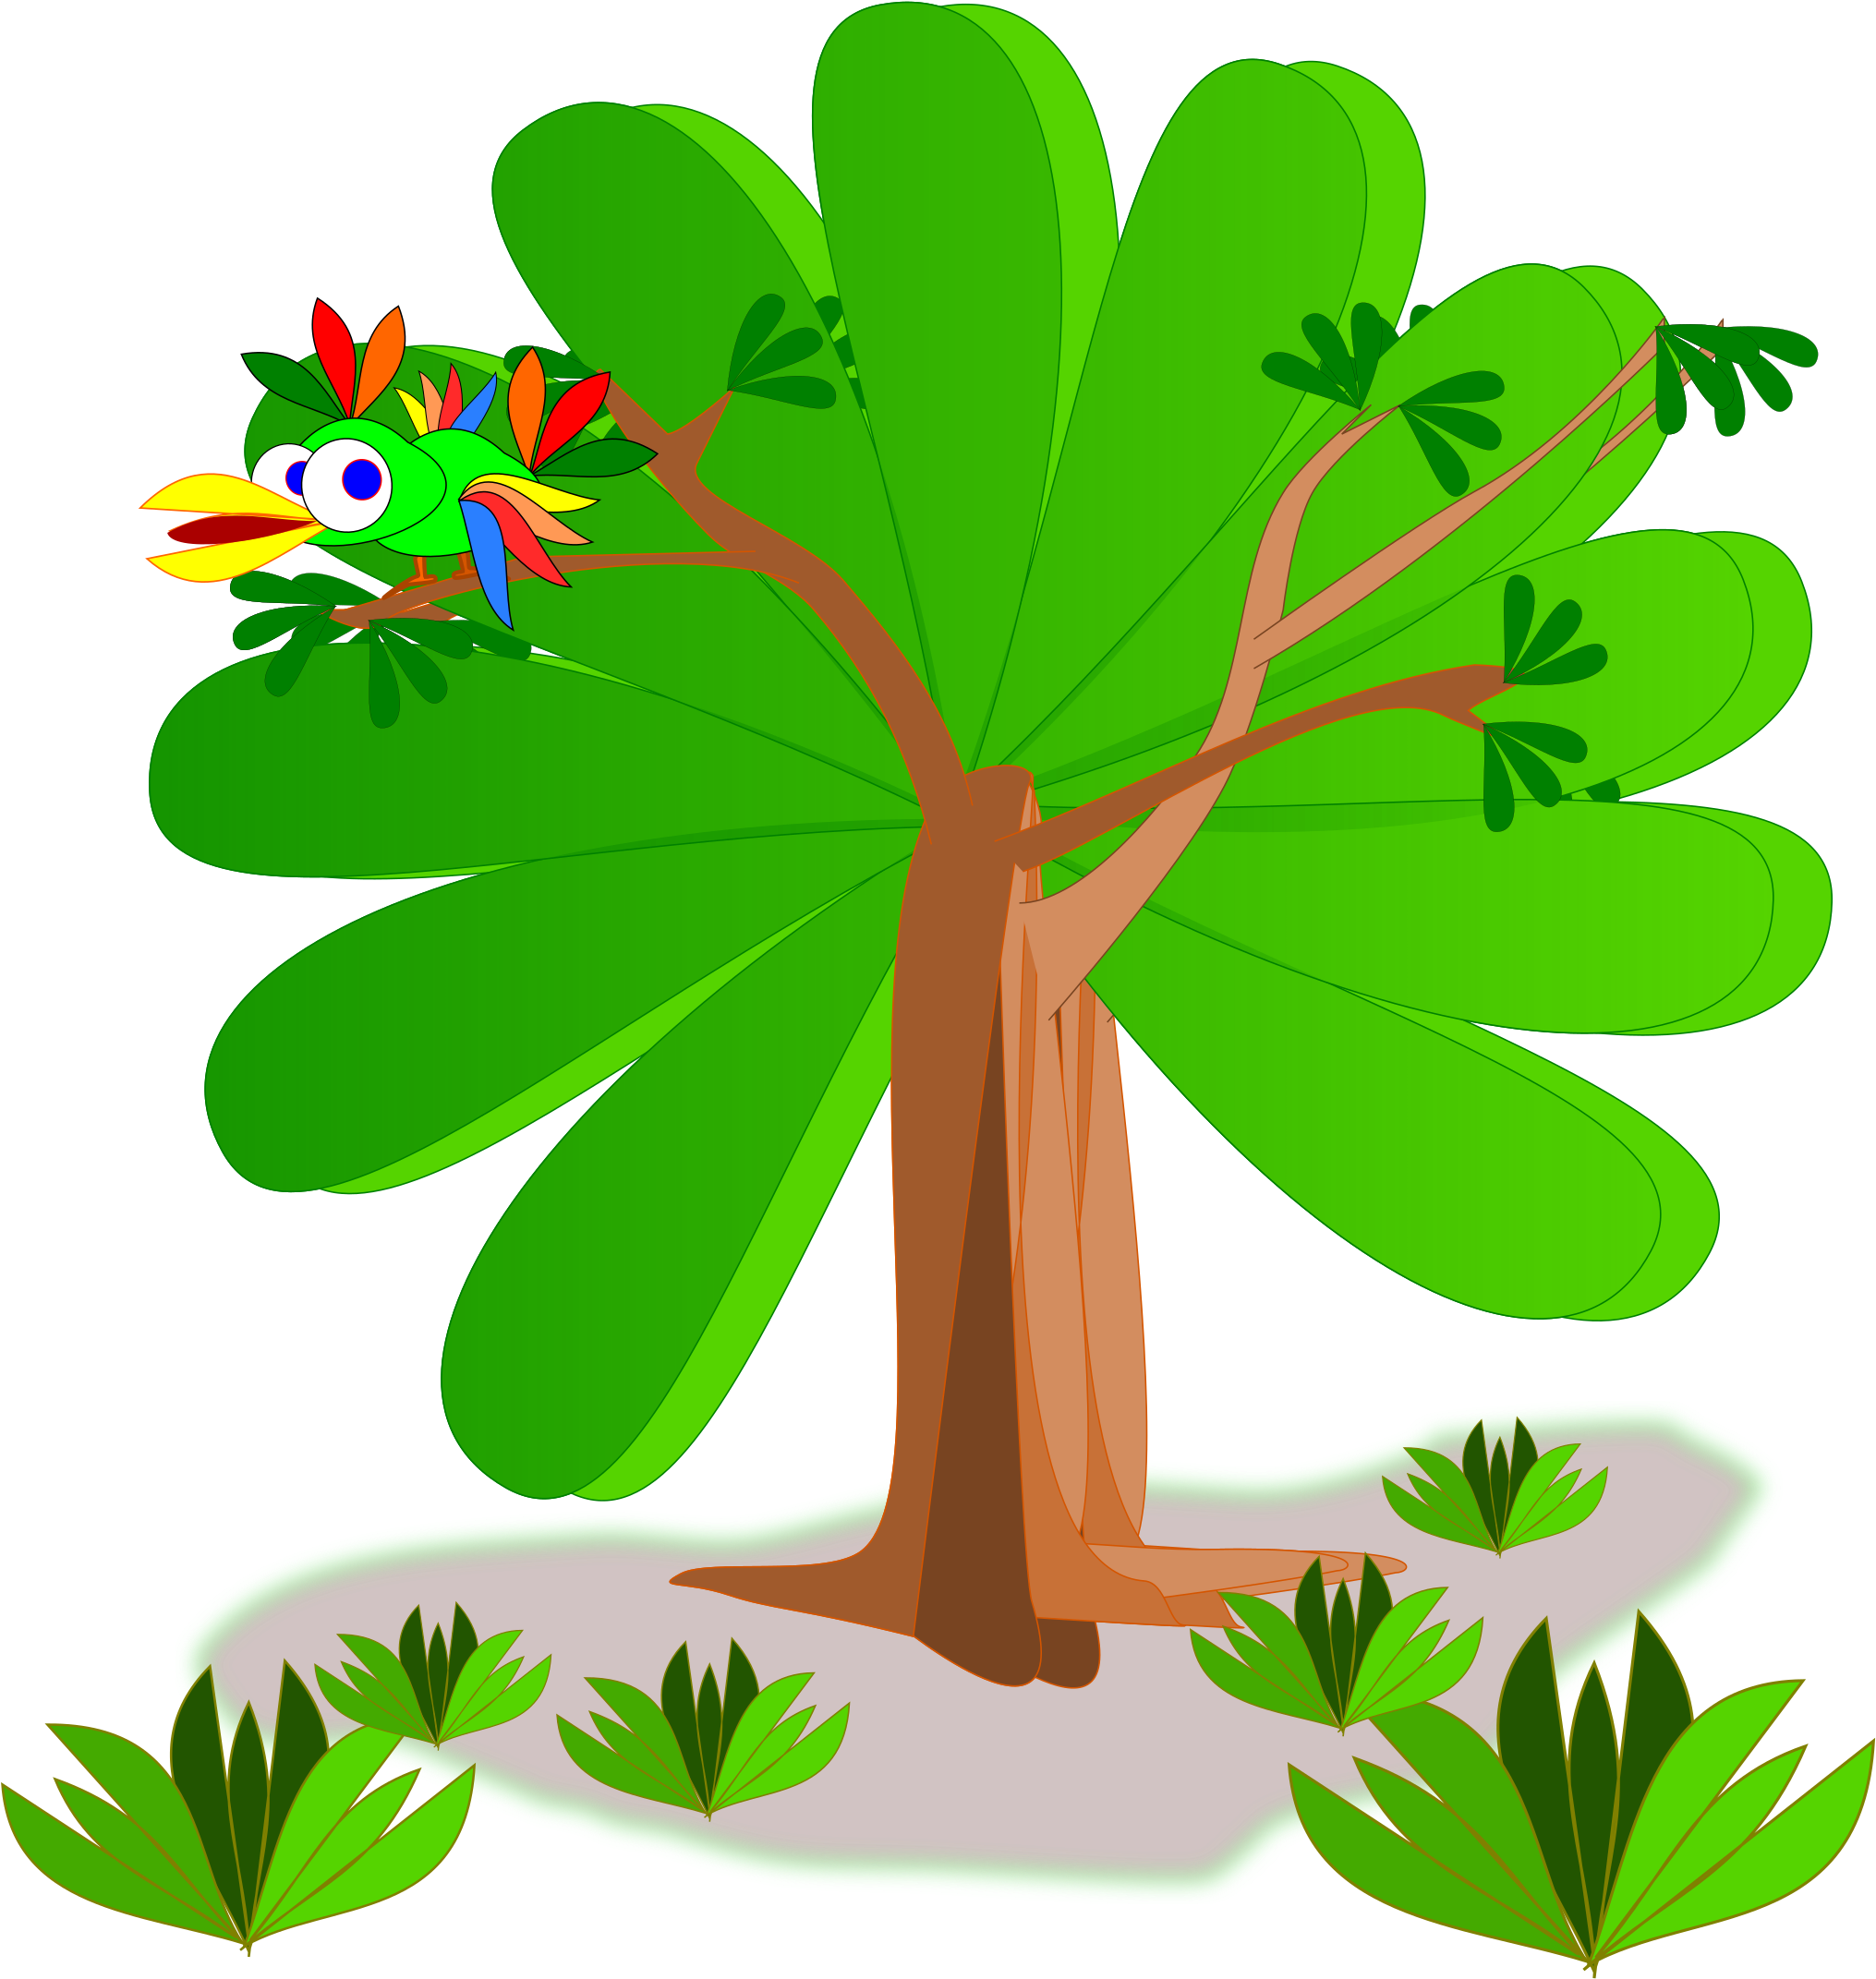 Clipart Arbor Day Rh Openclipart Org Armed Forces Day - Arbor Day Clip Art (2182x2400)